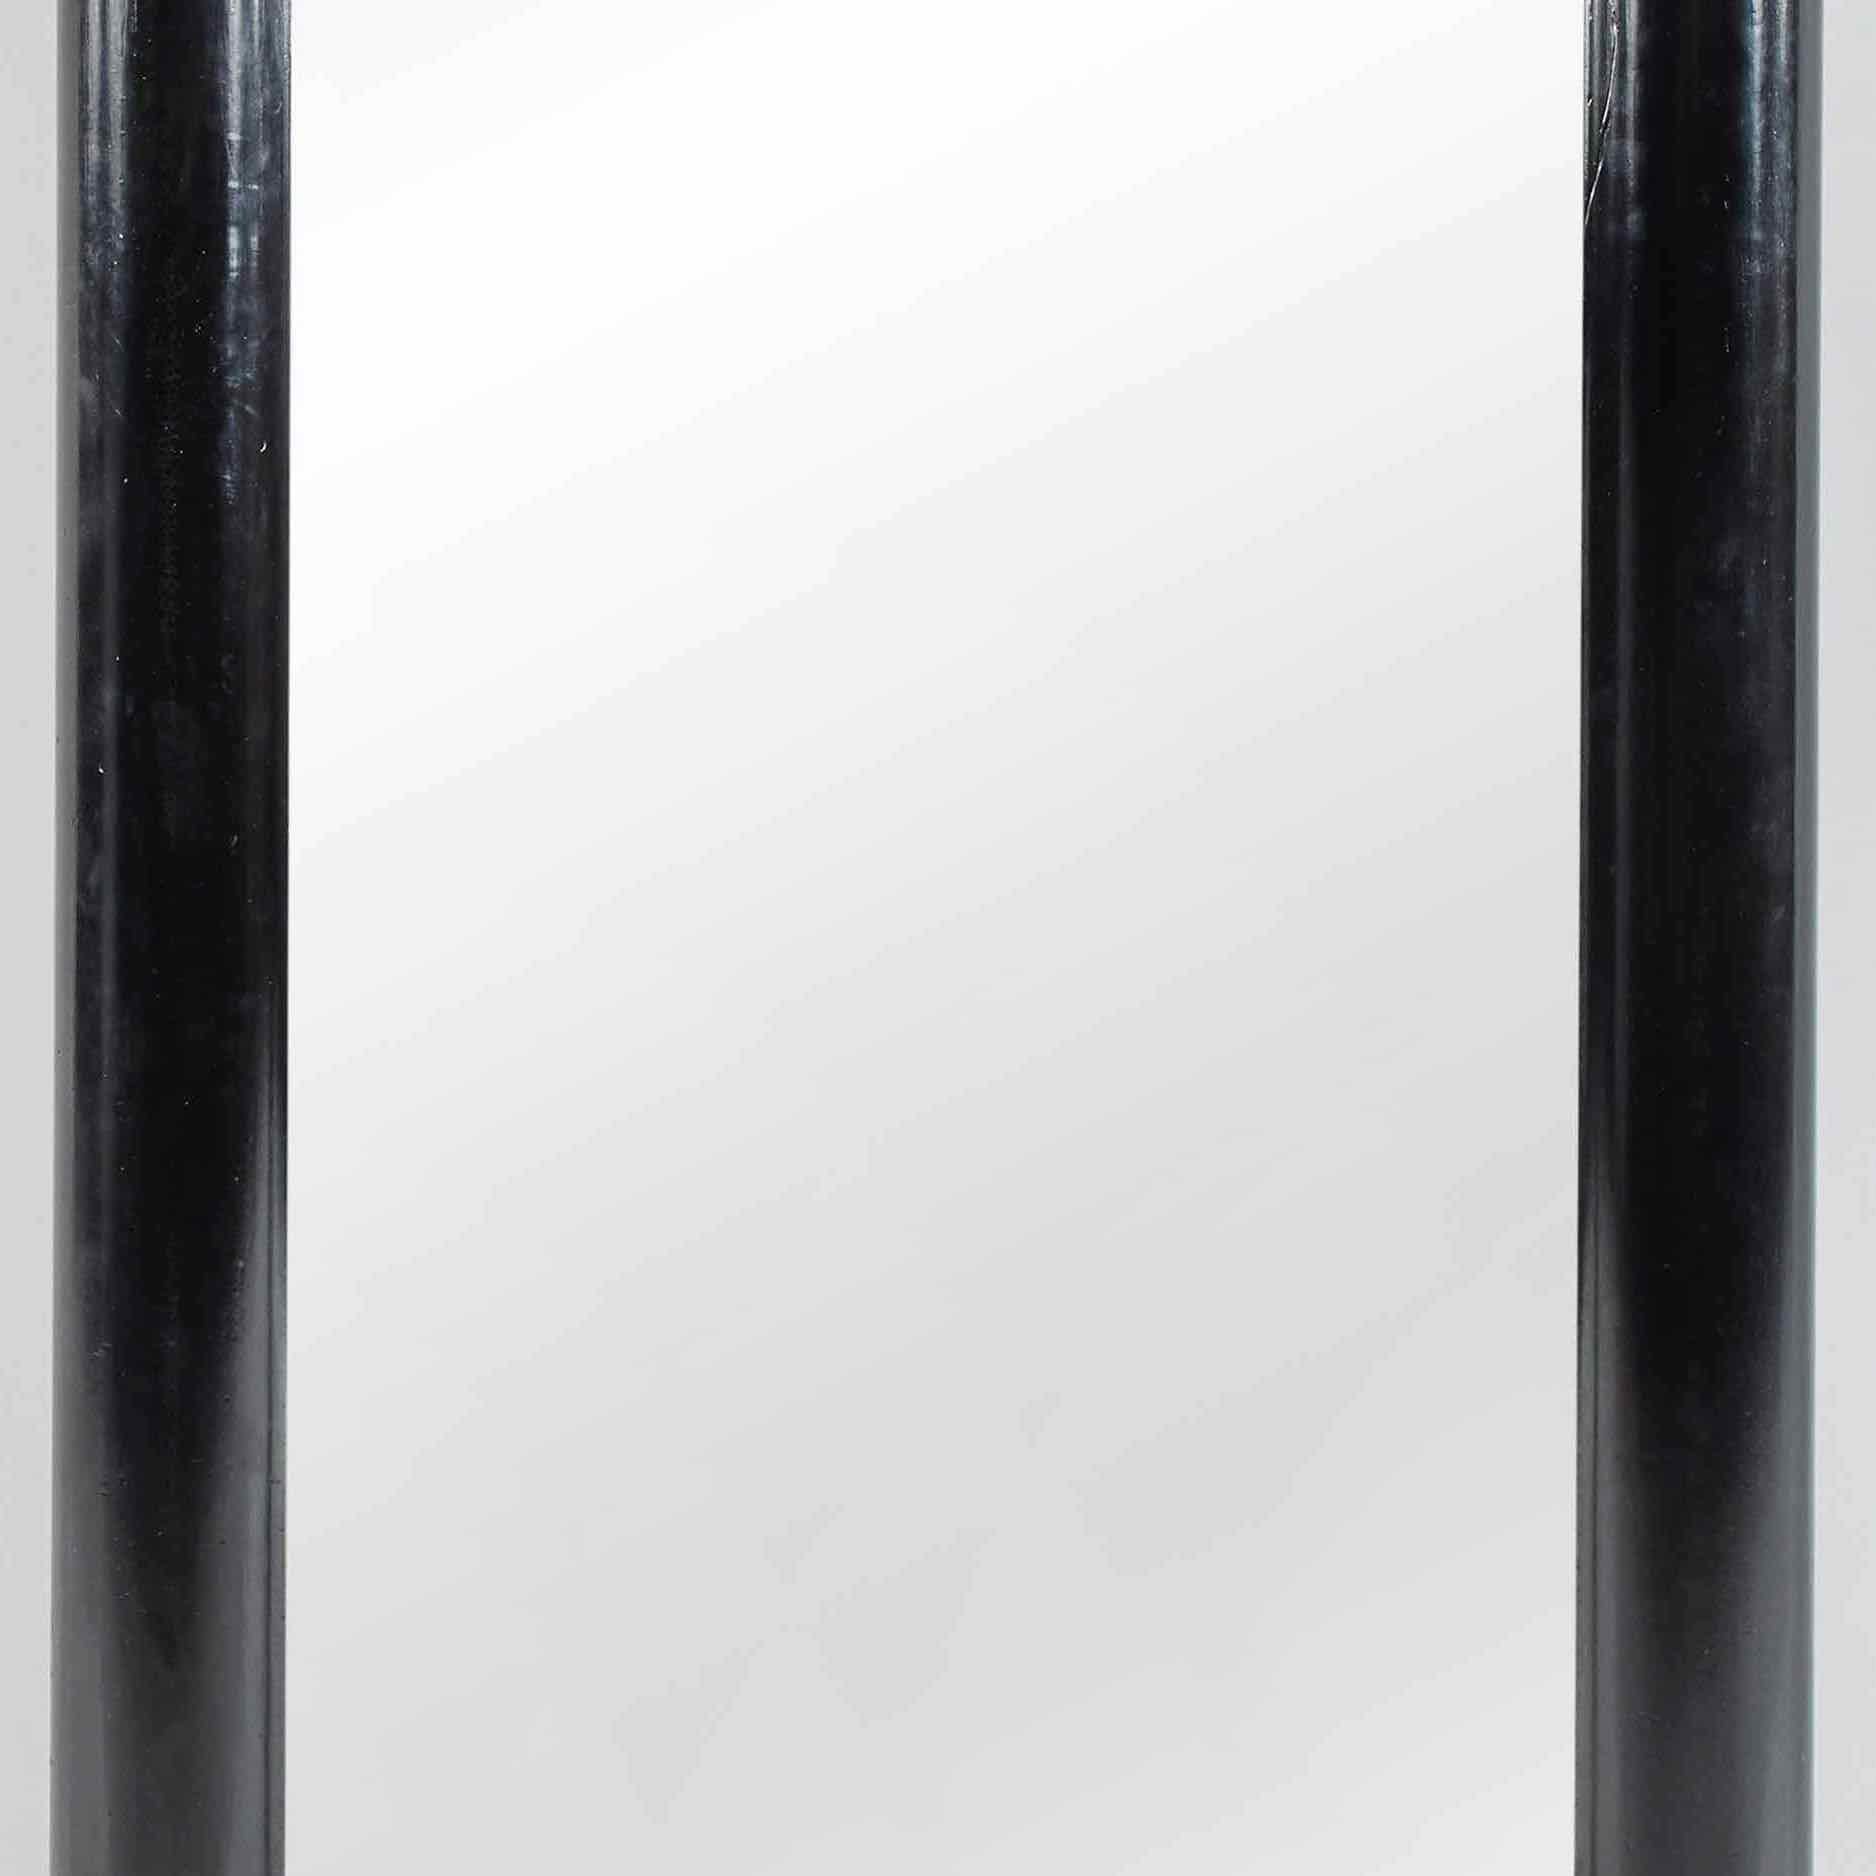 Late Victorian Large Rectangular Ebonized Mirror from Late 19th Century England 